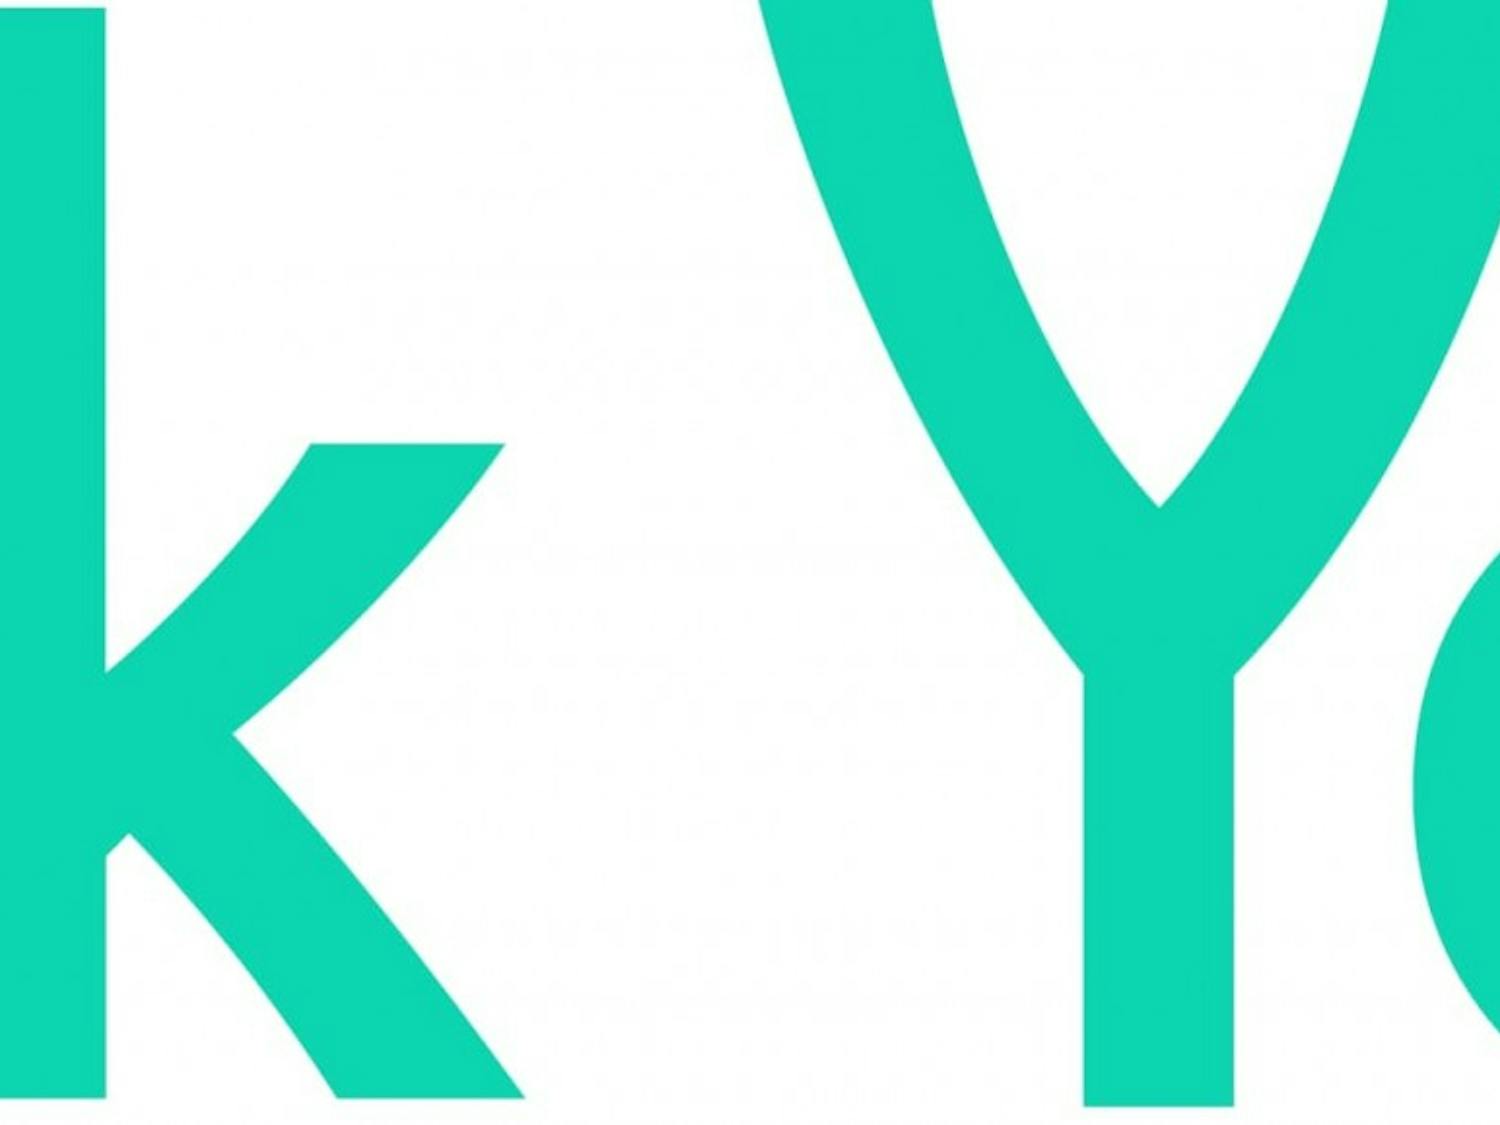 &nbsp;“Yik Yak” is a popular app on college campuses that allows users to post anonymously to a message board.&nbsp;